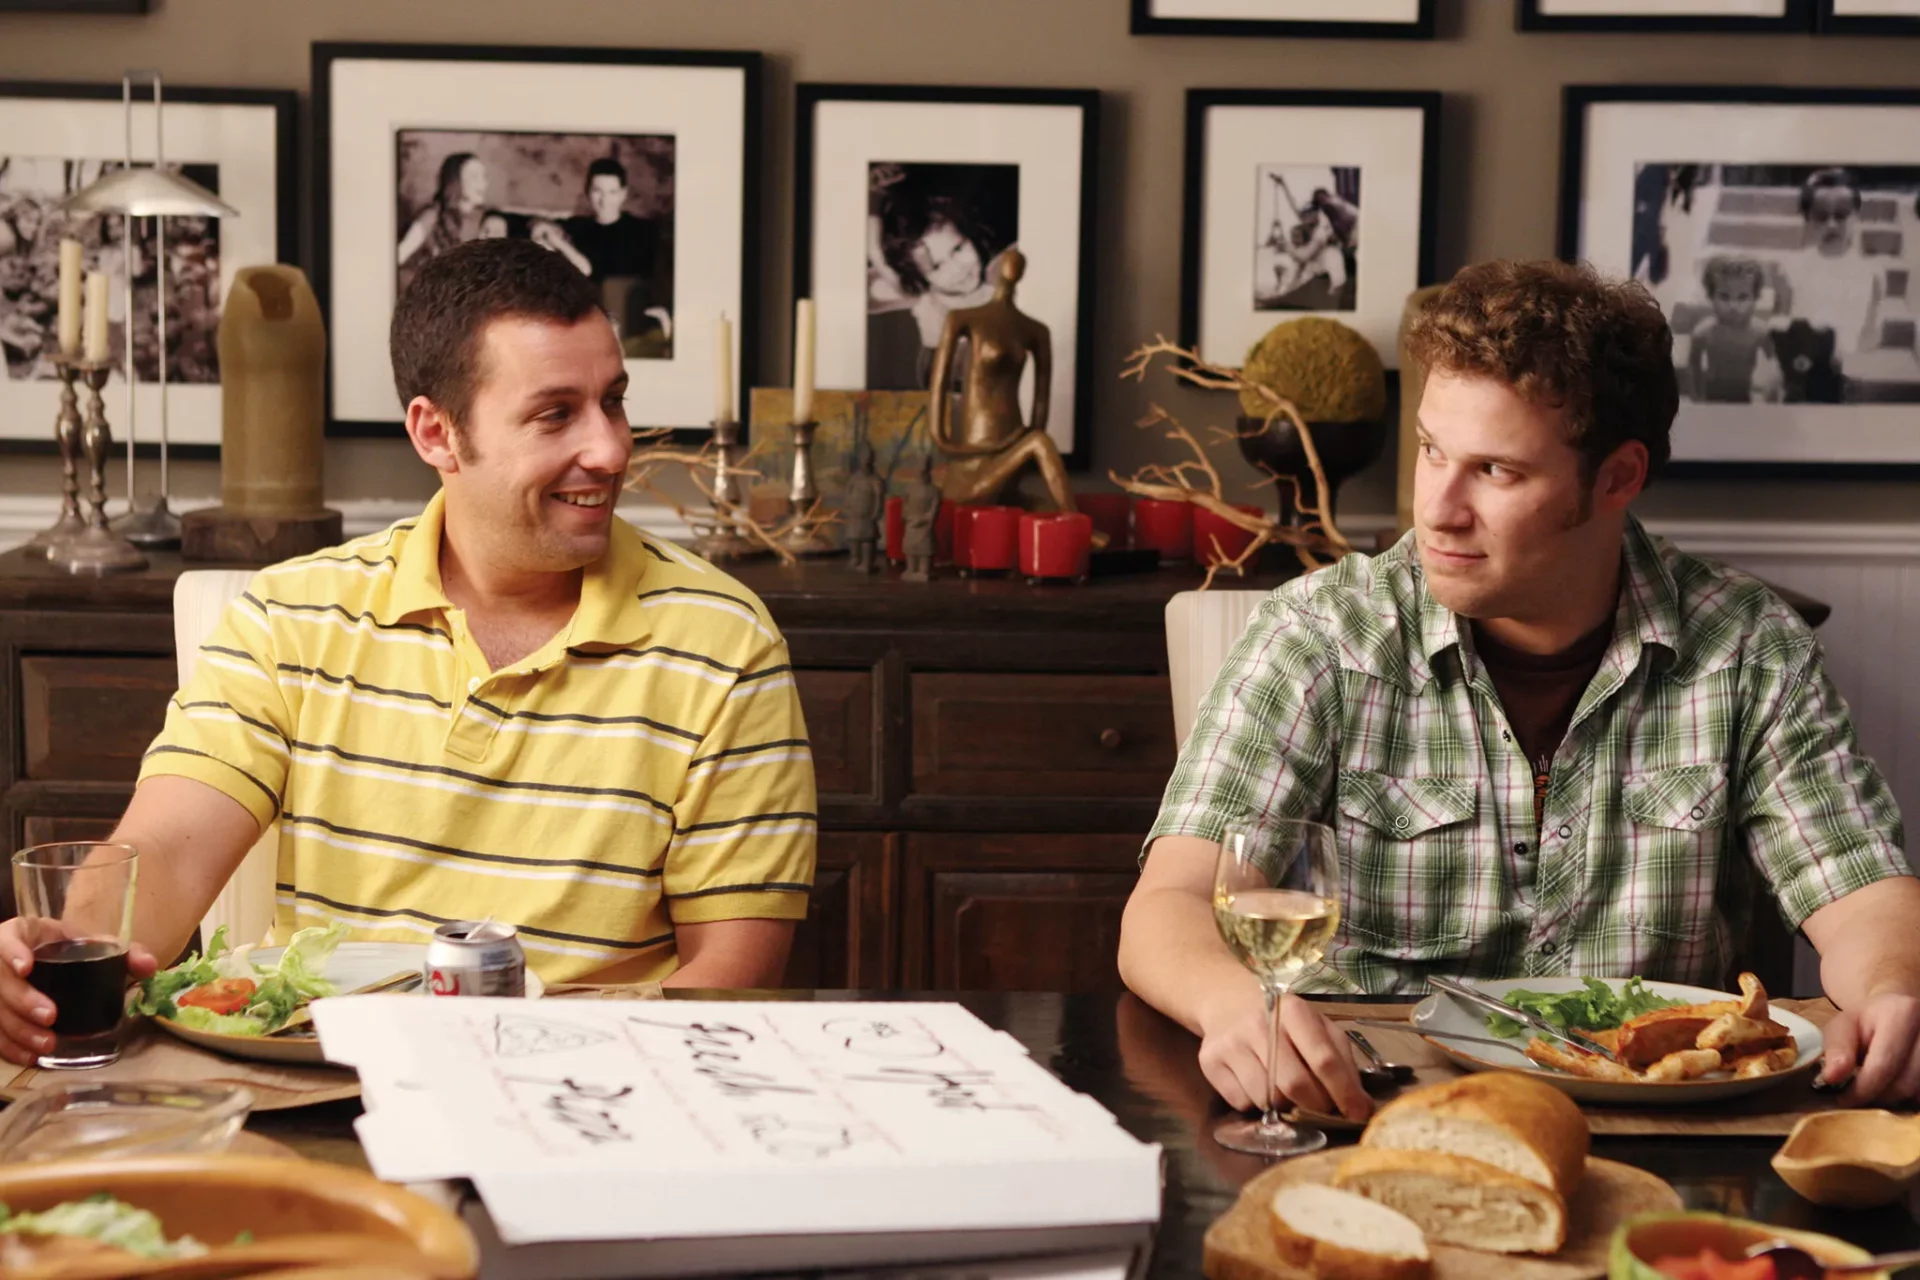 Adam Sandler and Seth Rogen in the film Funny People, one of Loud and Clear Reviews' top 10 Adam Sandler movies ranked from worst to best